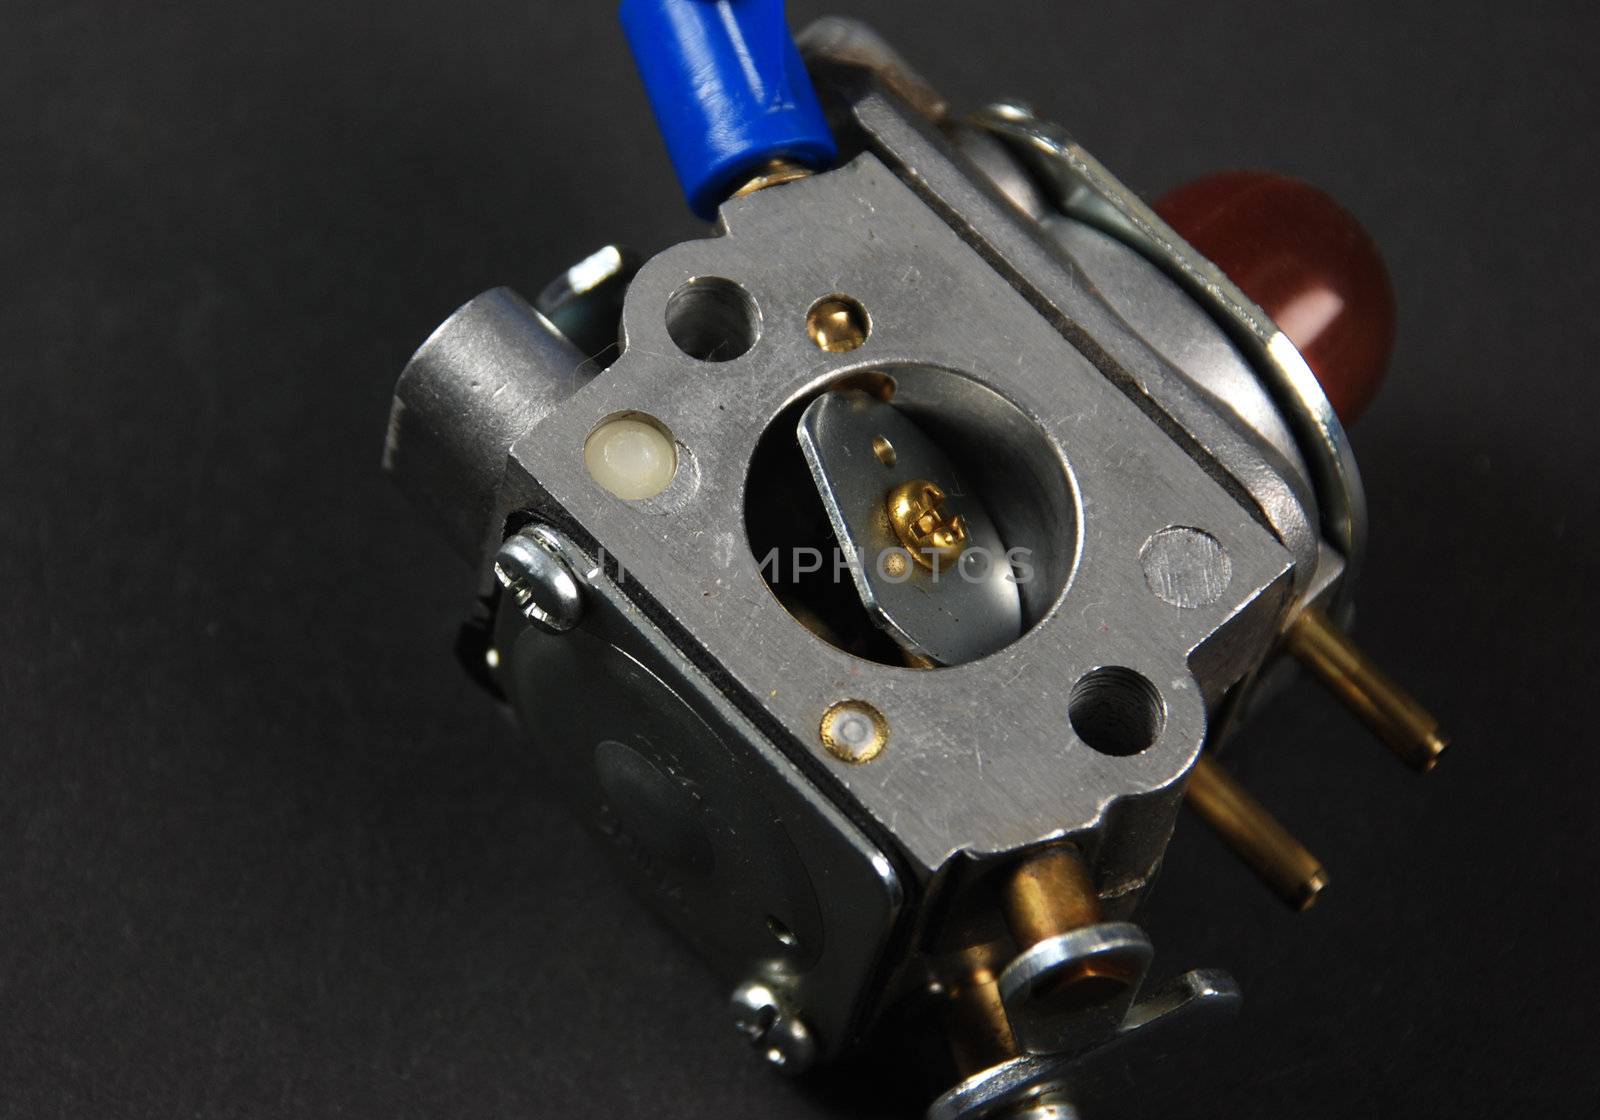 Stock pictures of a small gas engine and a carburetor